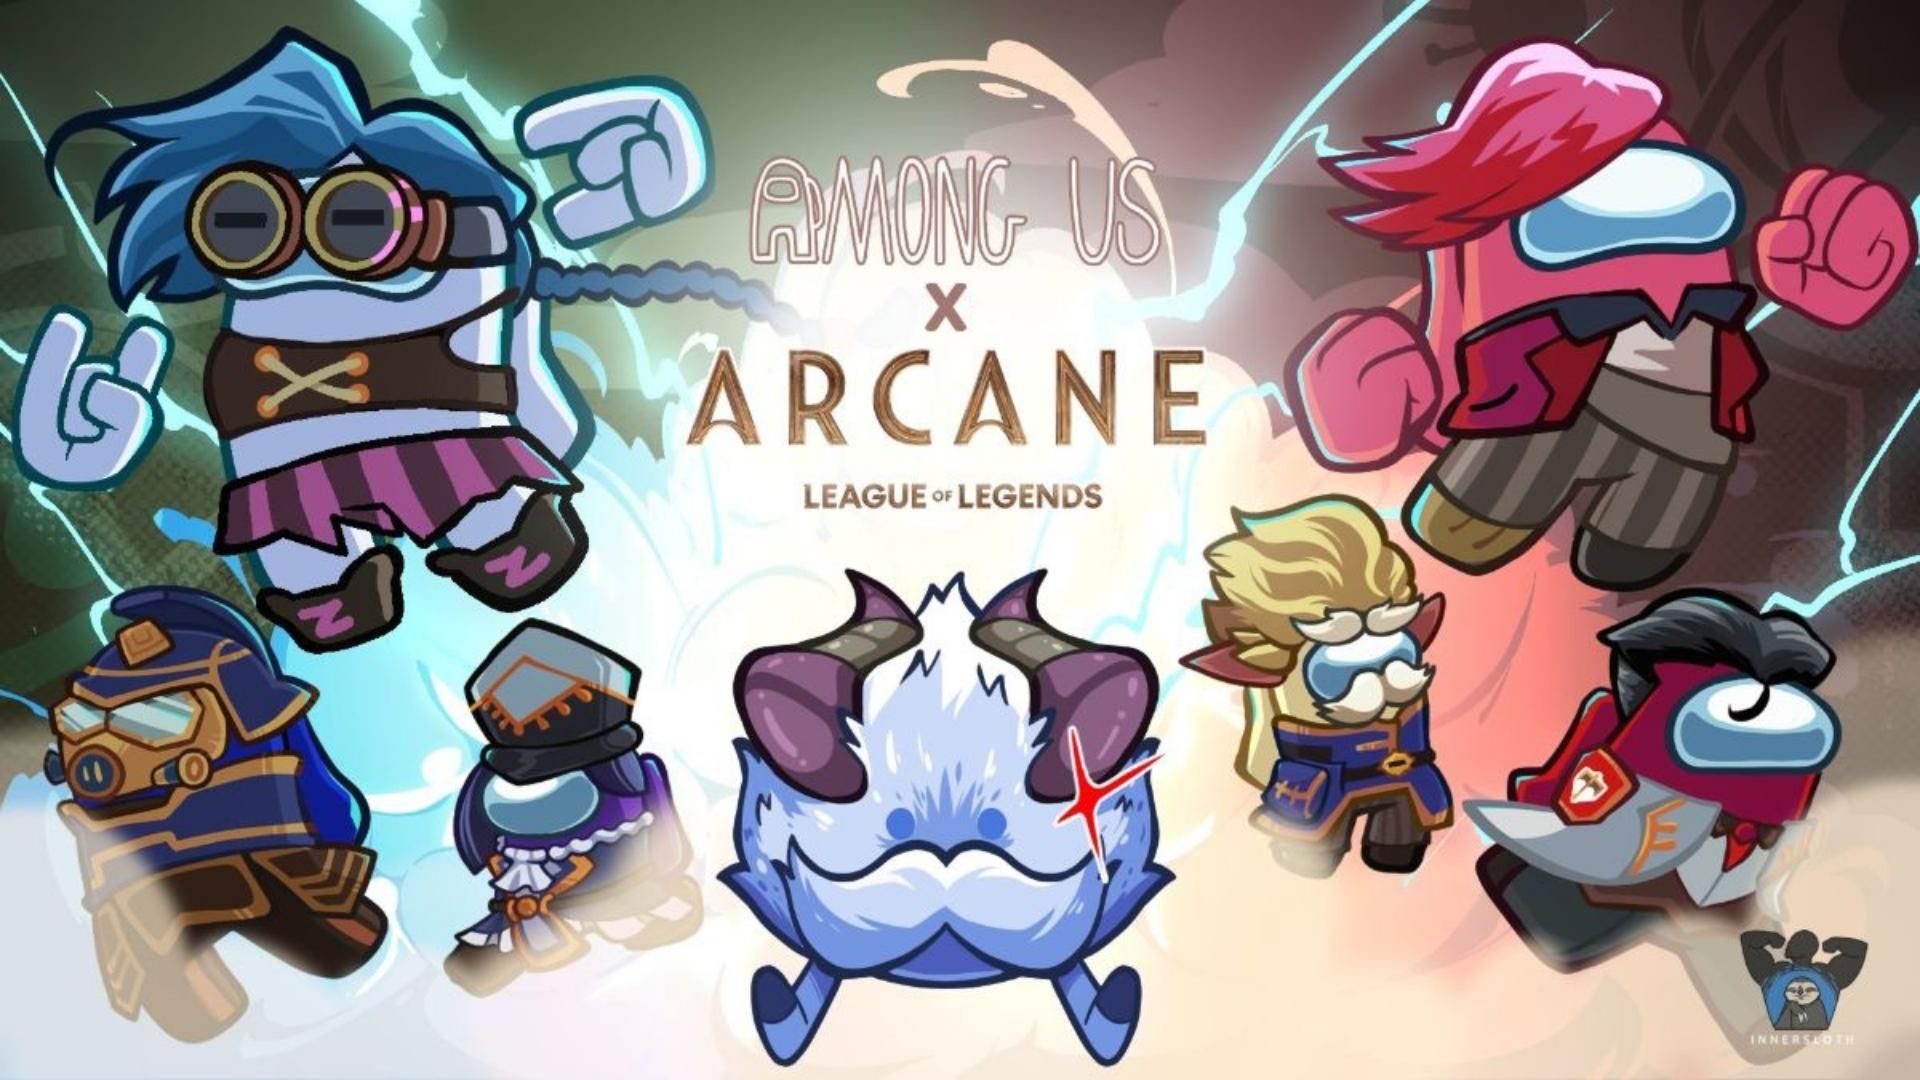 Among Us and League of Legends' Arcane gets major crossover